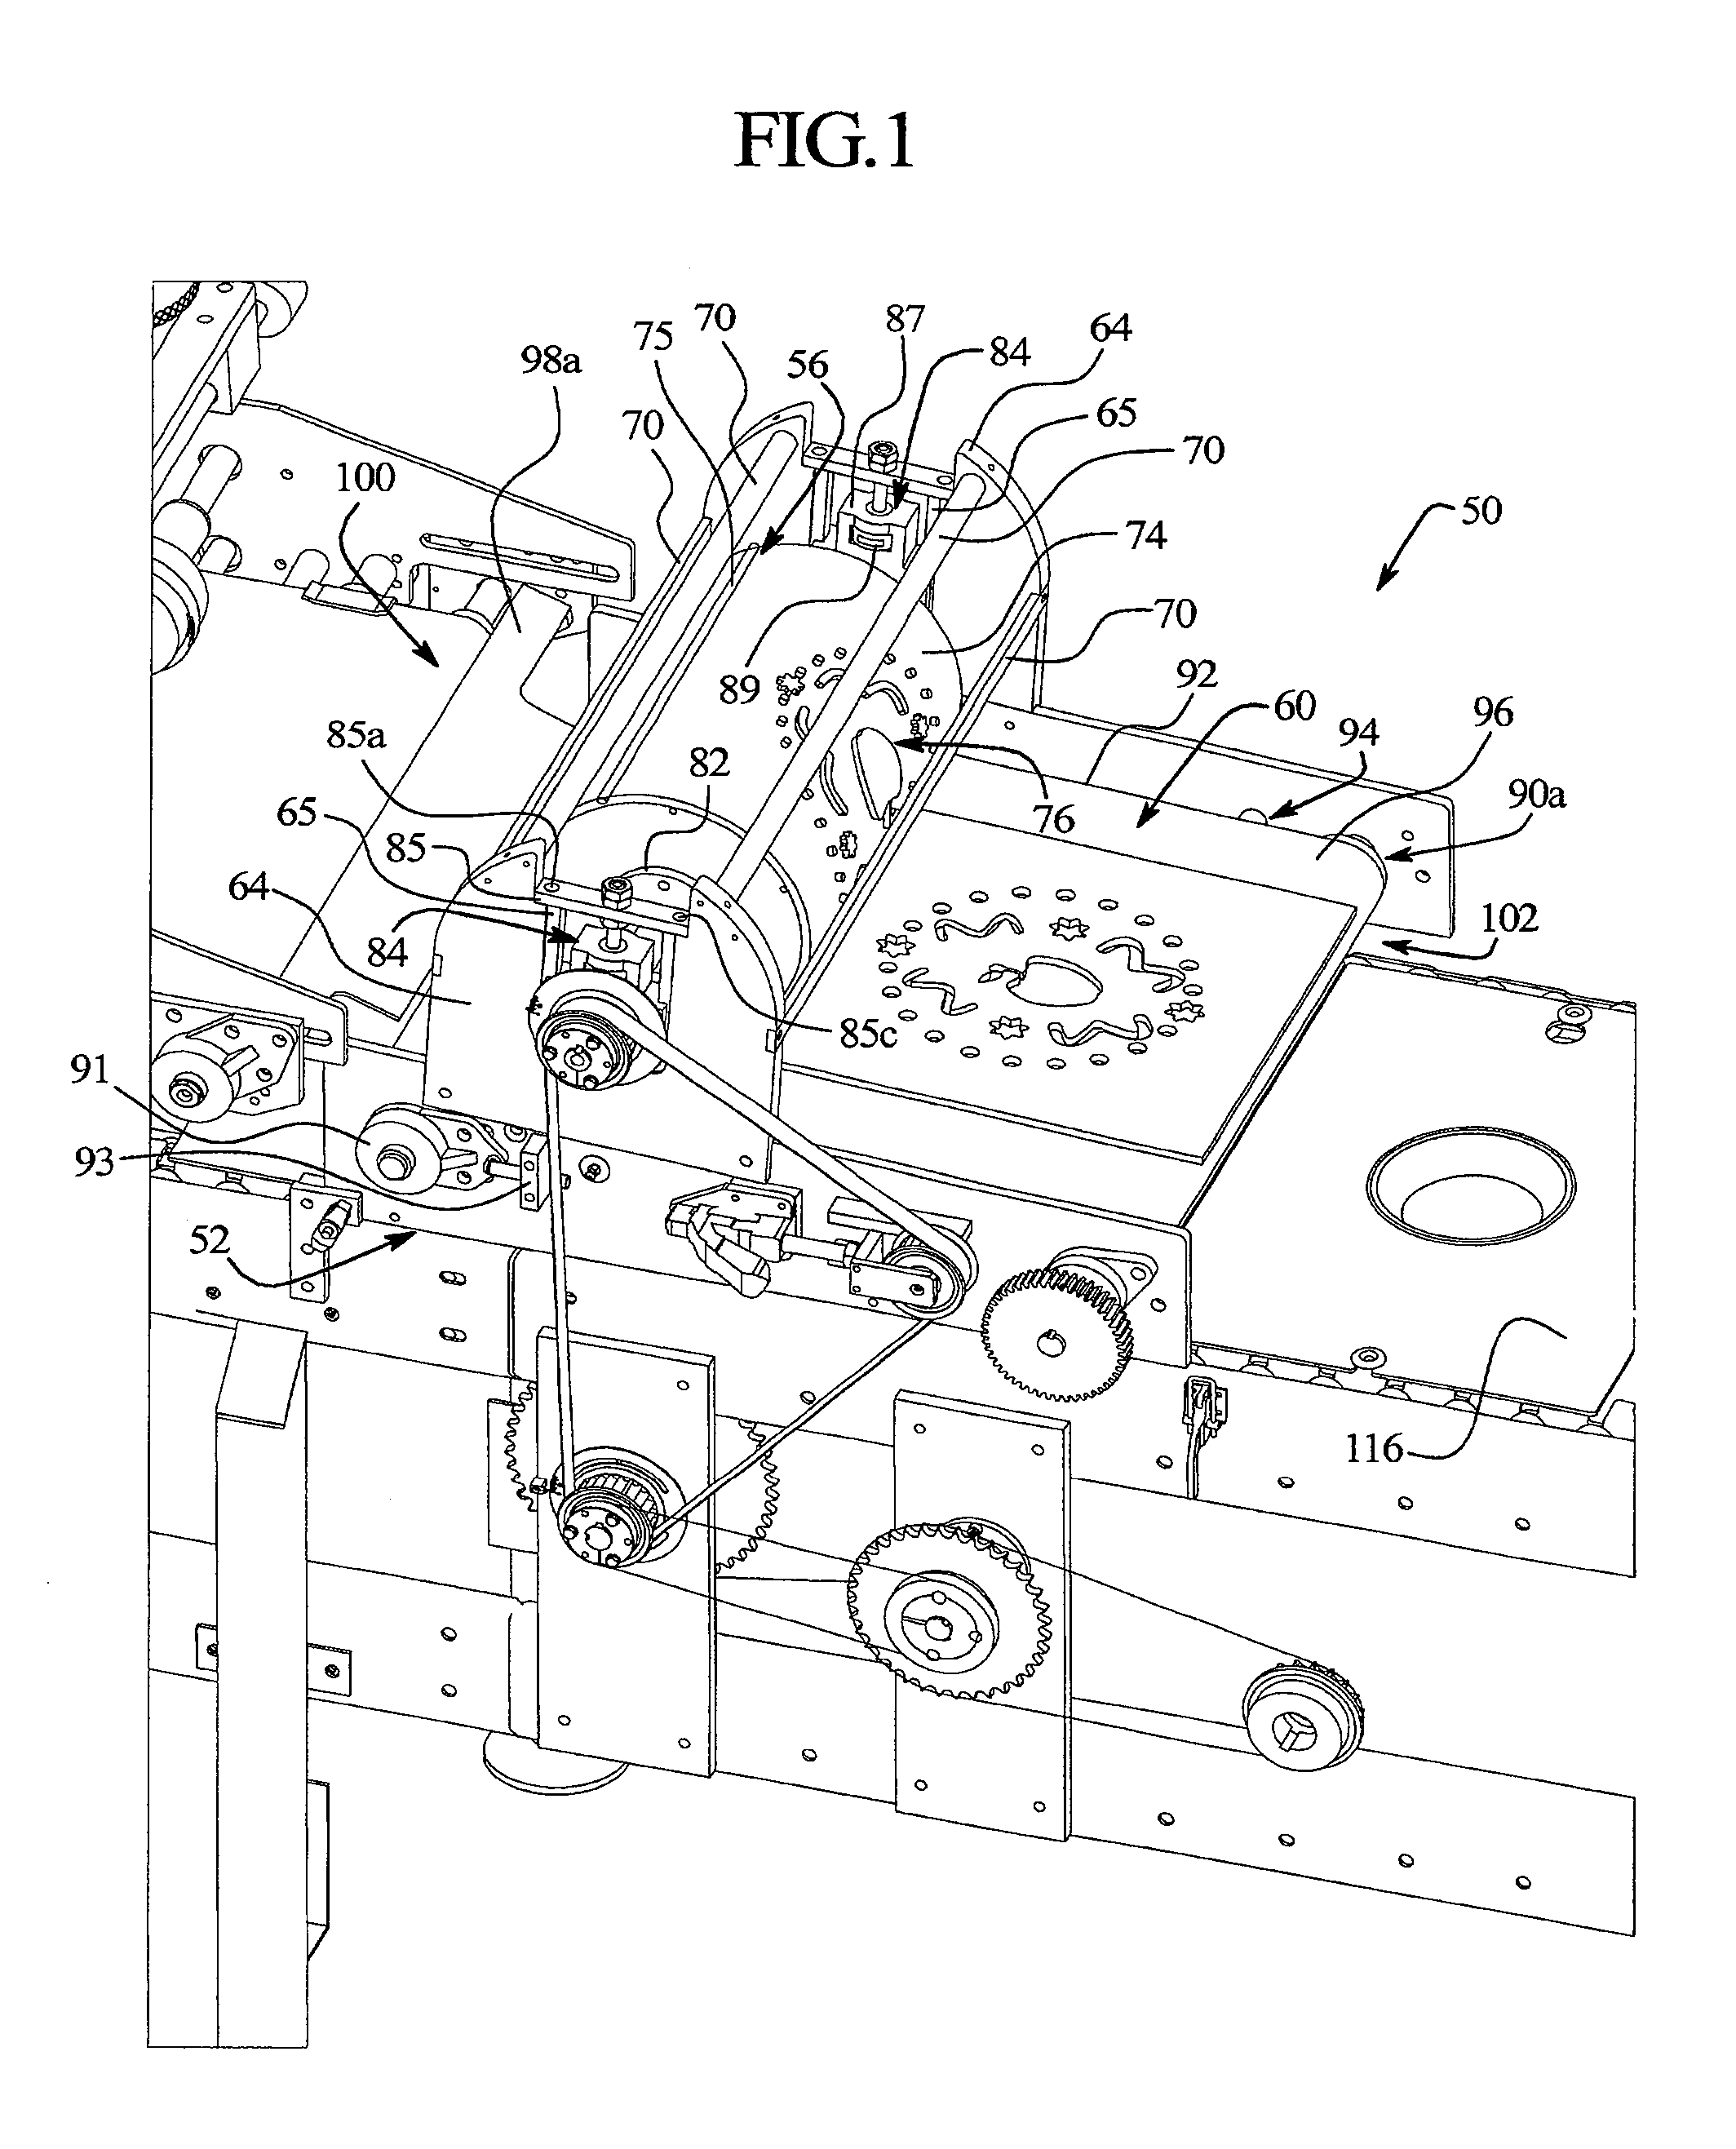 Pie top forming apparatus and method